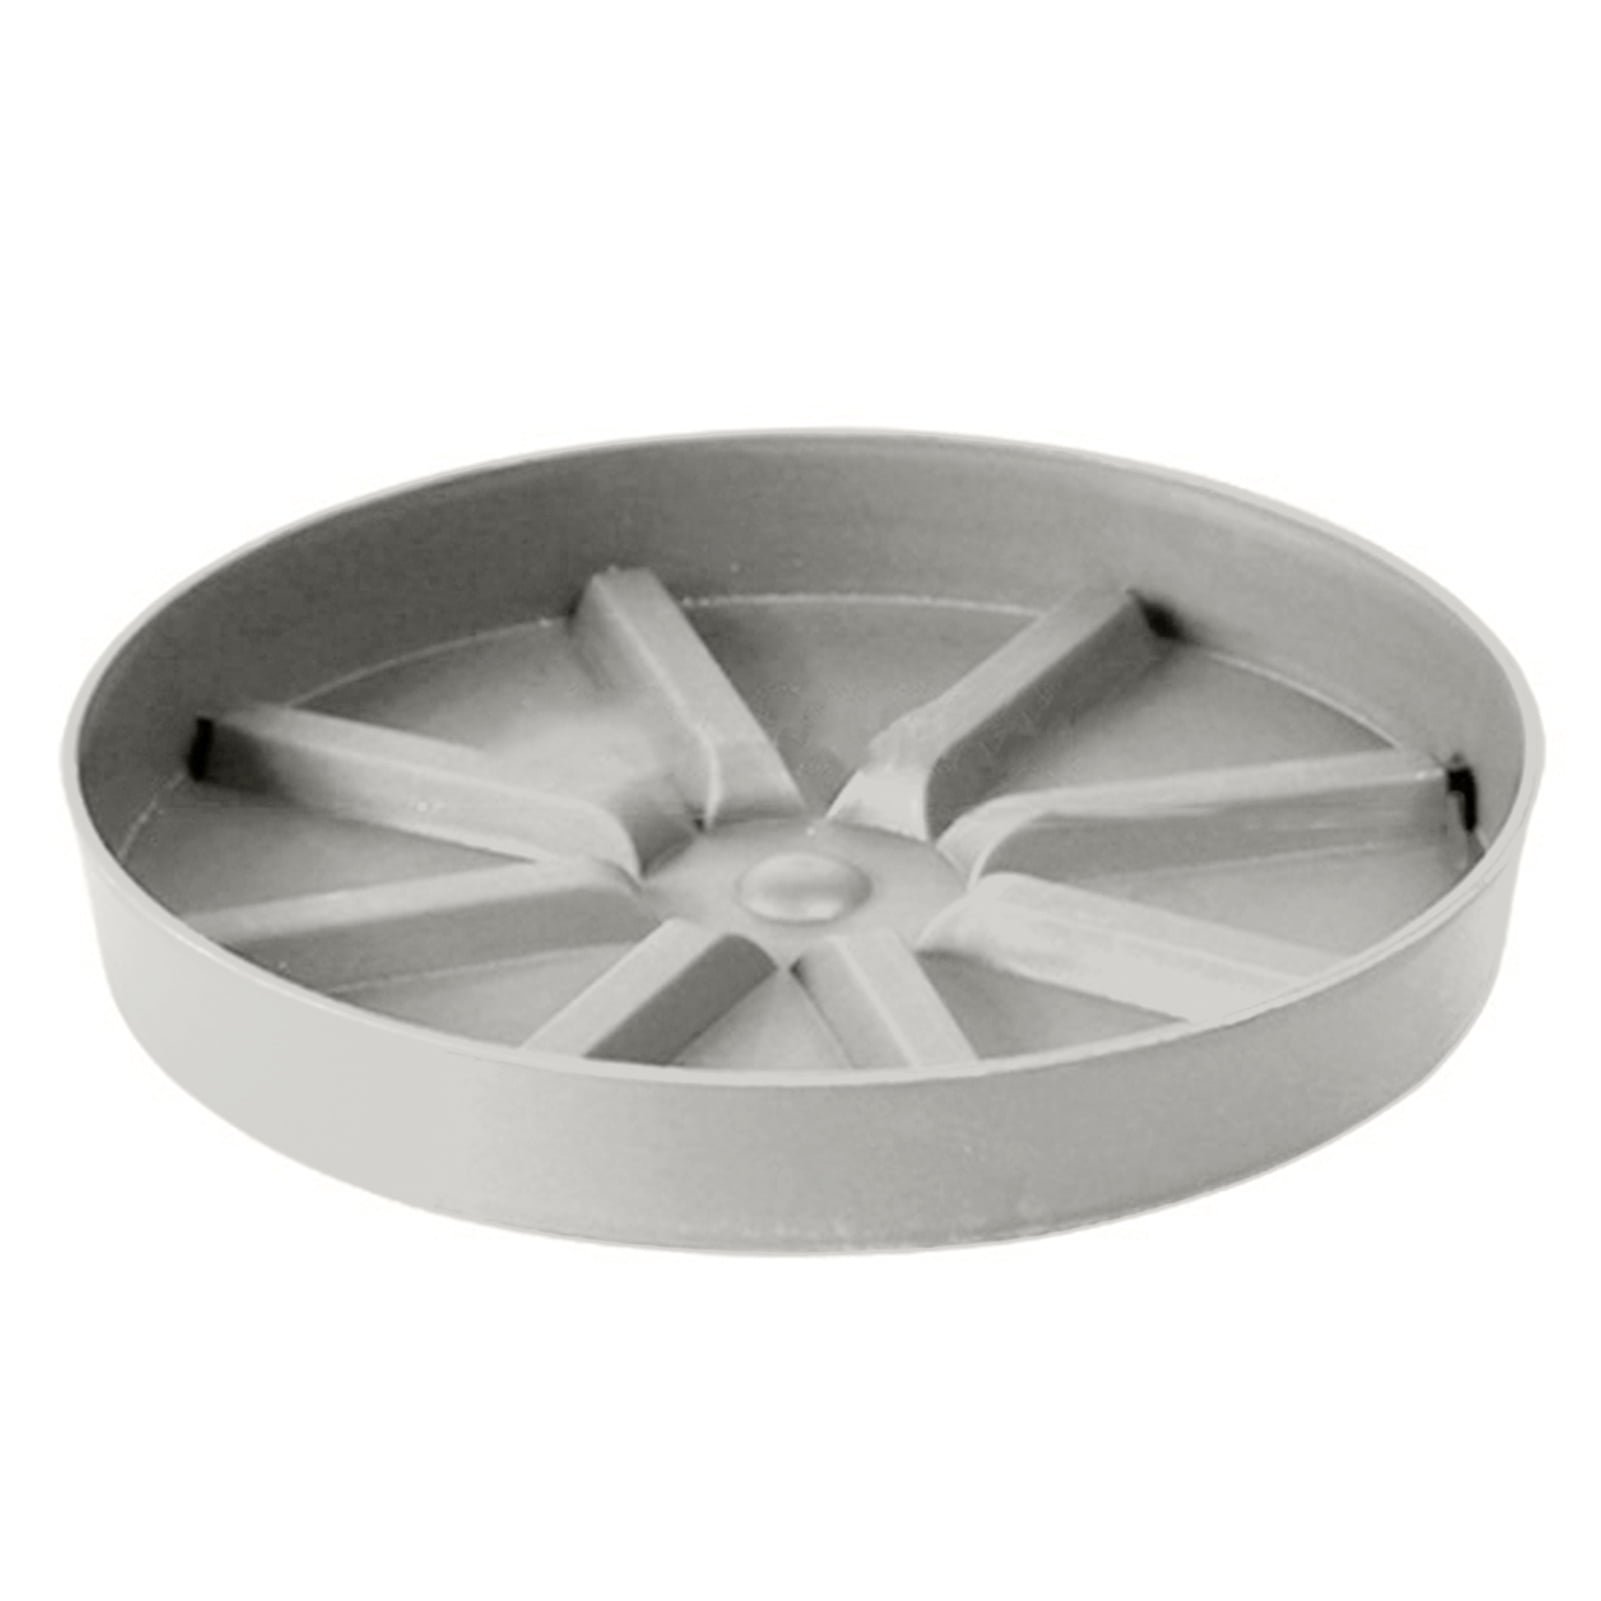 Juliy Round Plastic Flower Pot Tray, Concave and Convex Groove Design ...